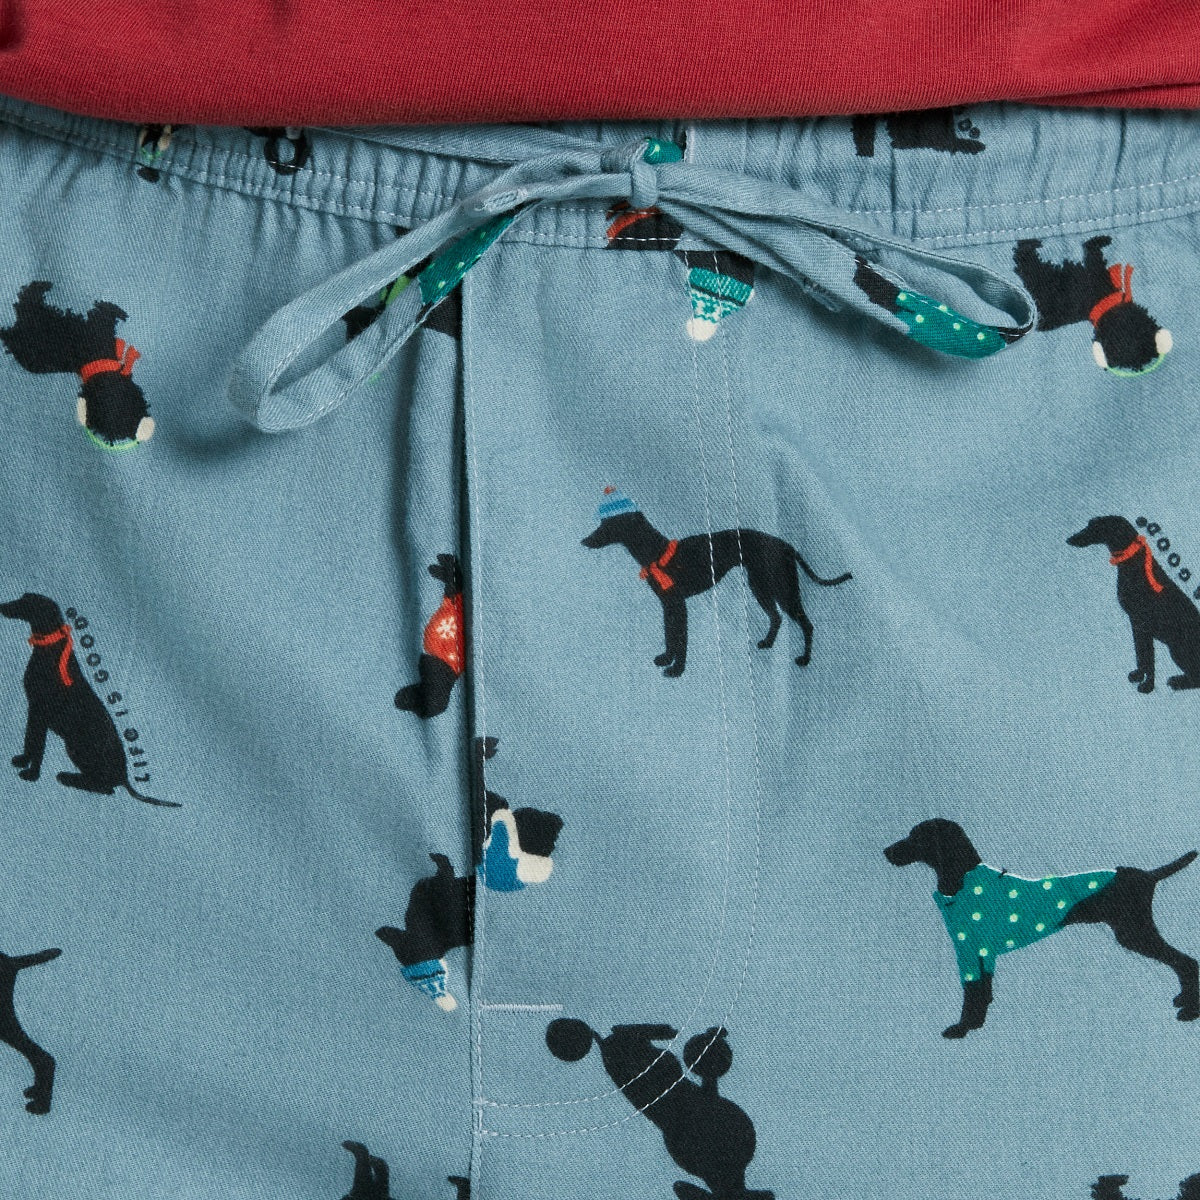 Life is Good M Classic Sleep Pant Chilly Dogs SMOKE BLUE